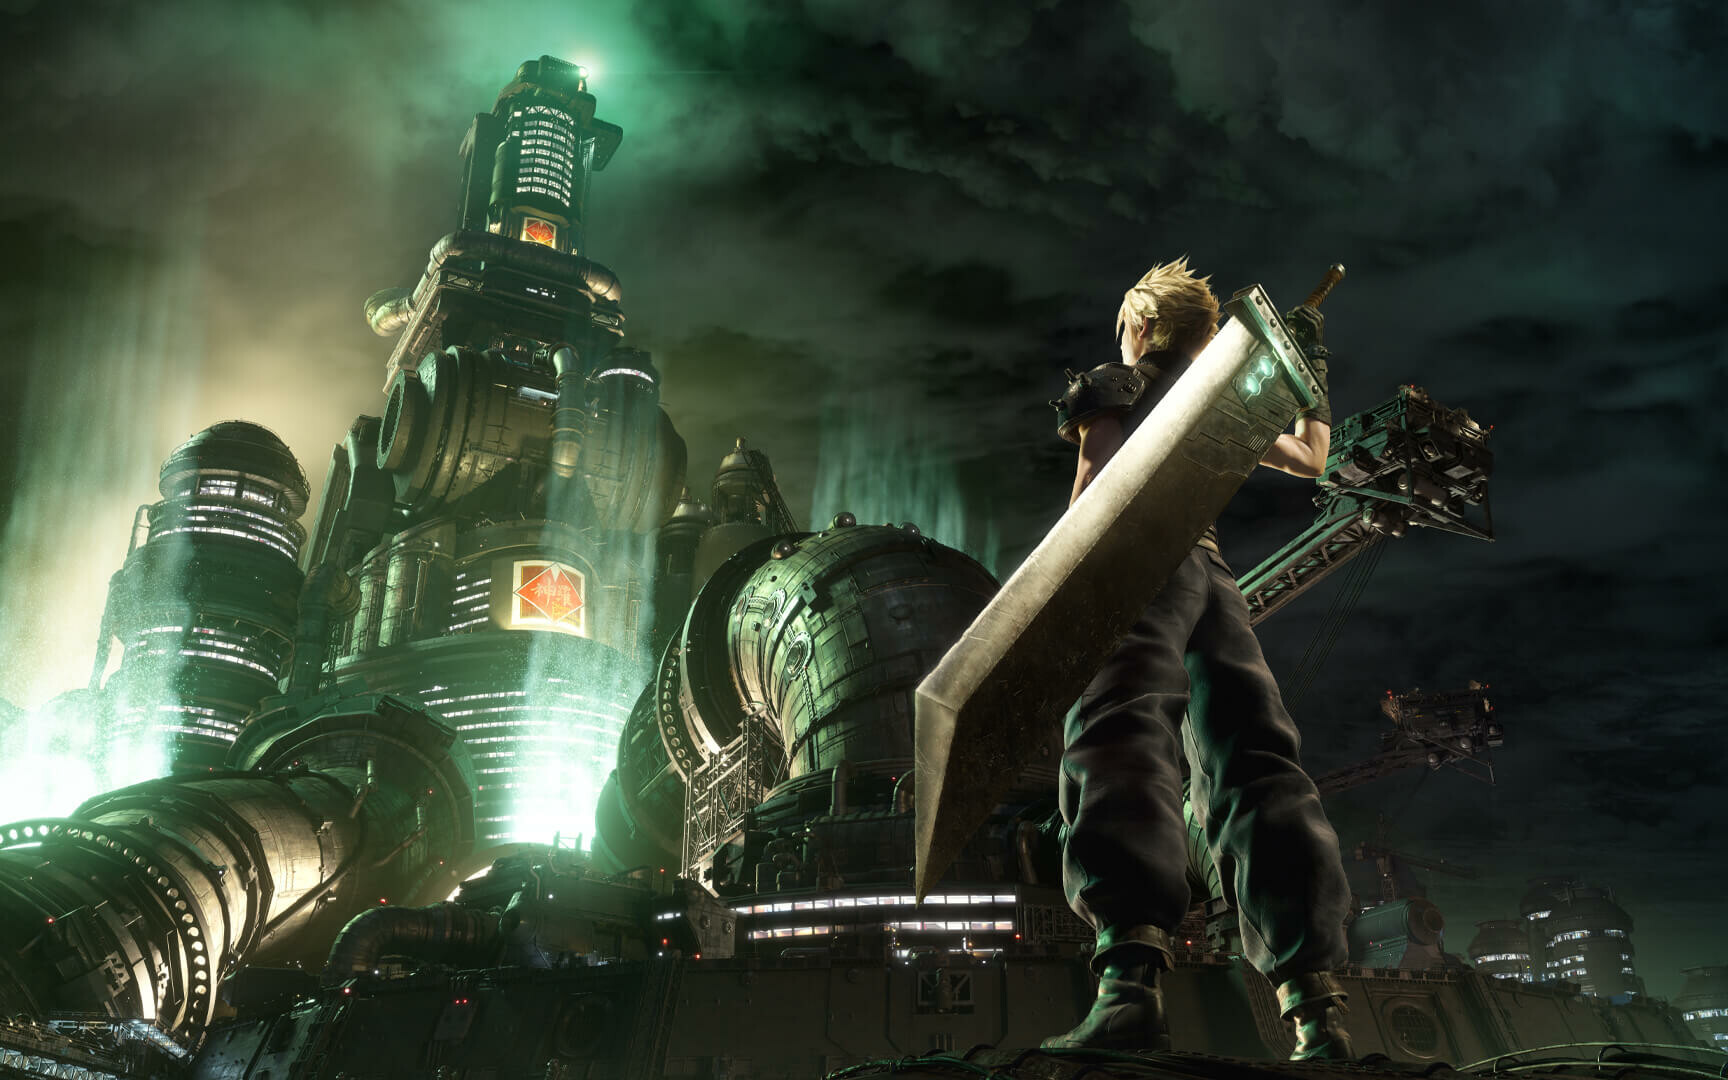 Final Fantasy VII Remake and Chivalry 2 on Steam show how players hate the Epic Games Store